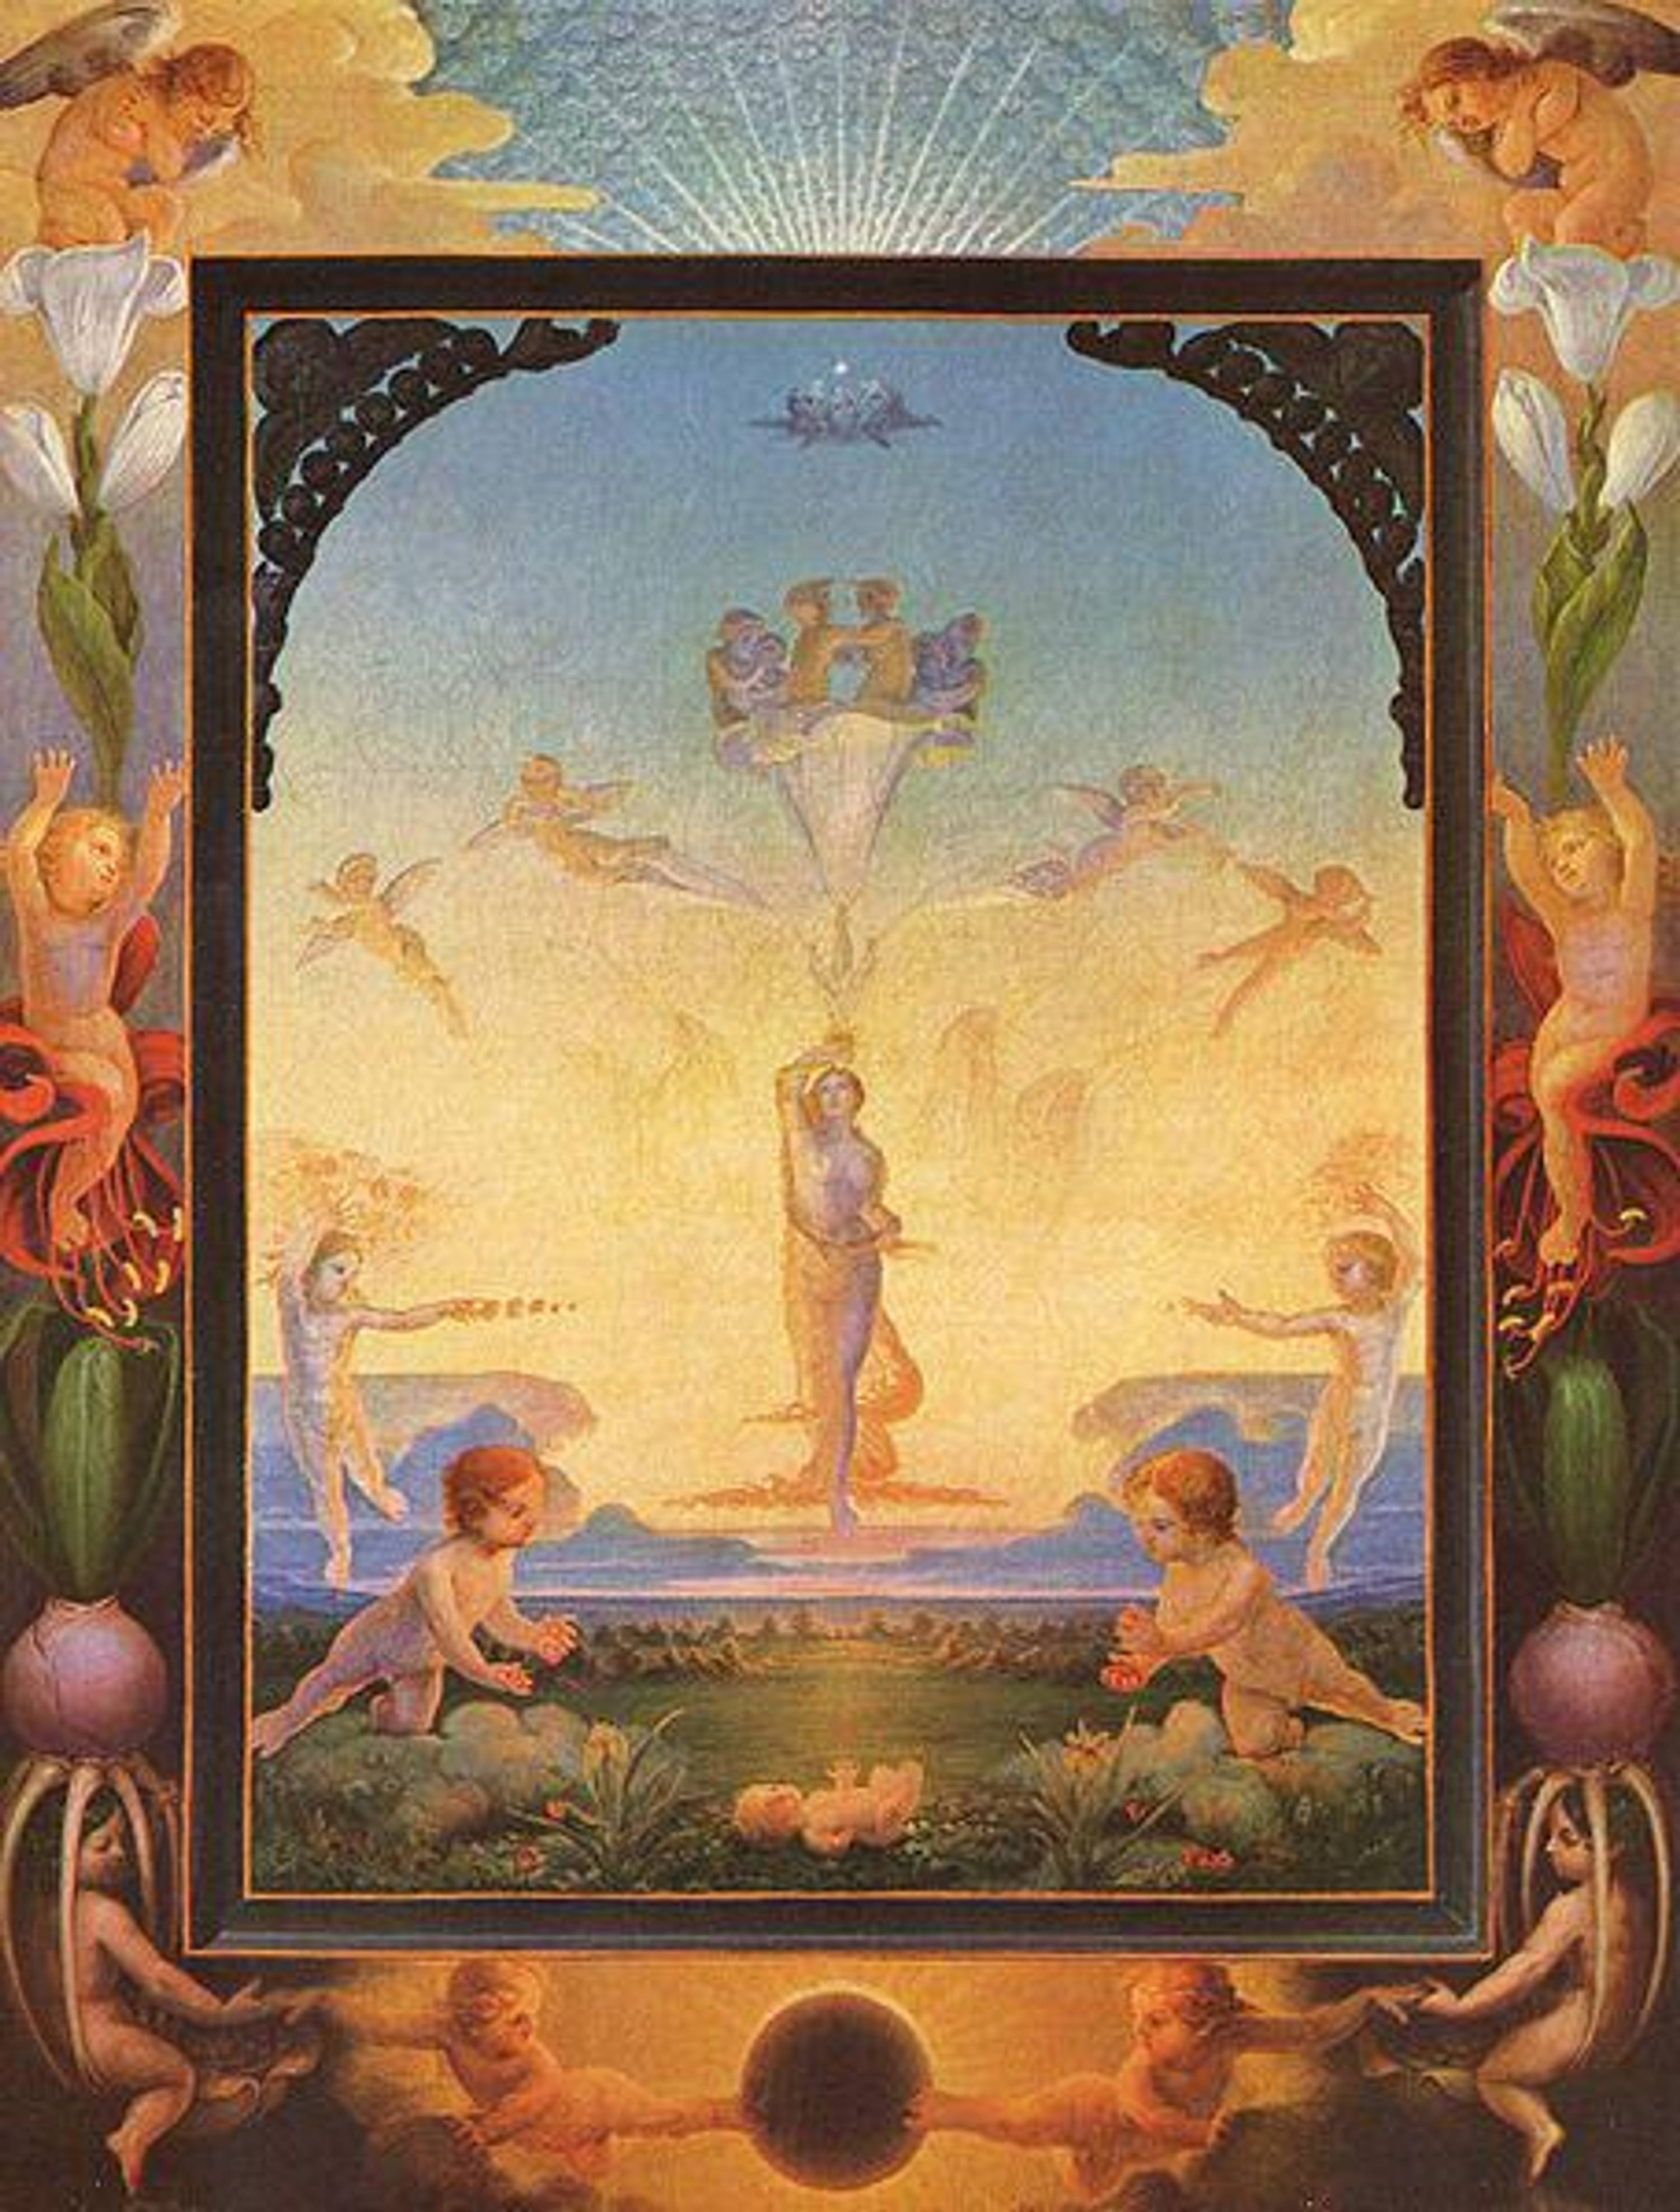 Der Morgen (&quot;Morning&quot;, 1808), oil on canvas by Philipp Otto Runge